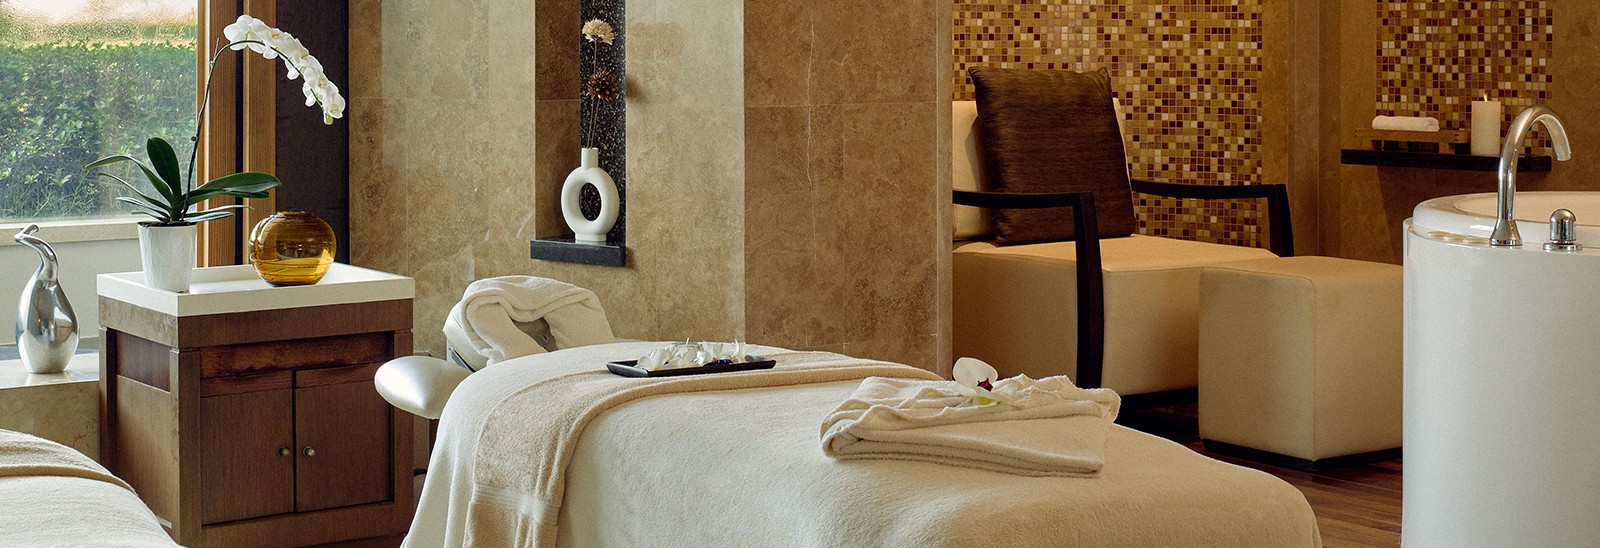 MELIÁ DESERT PALM DUBAI: DISCOVERING RELAXATION AND PEACE